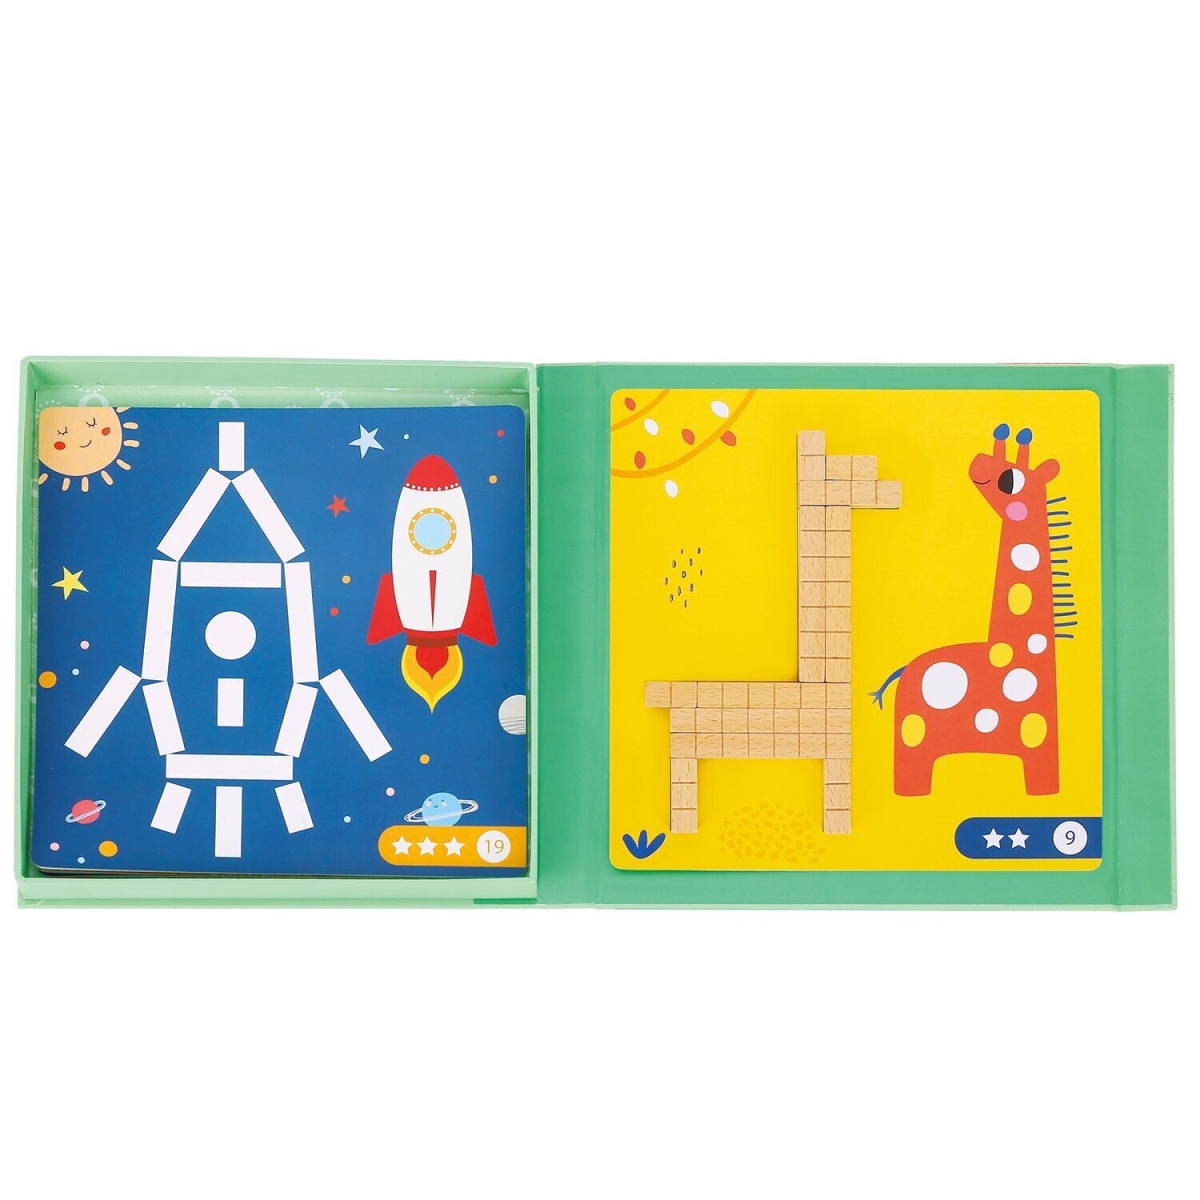 Picture of Tooky Toy 300234 22 x 22 x 3 cm Creative Math Sticks